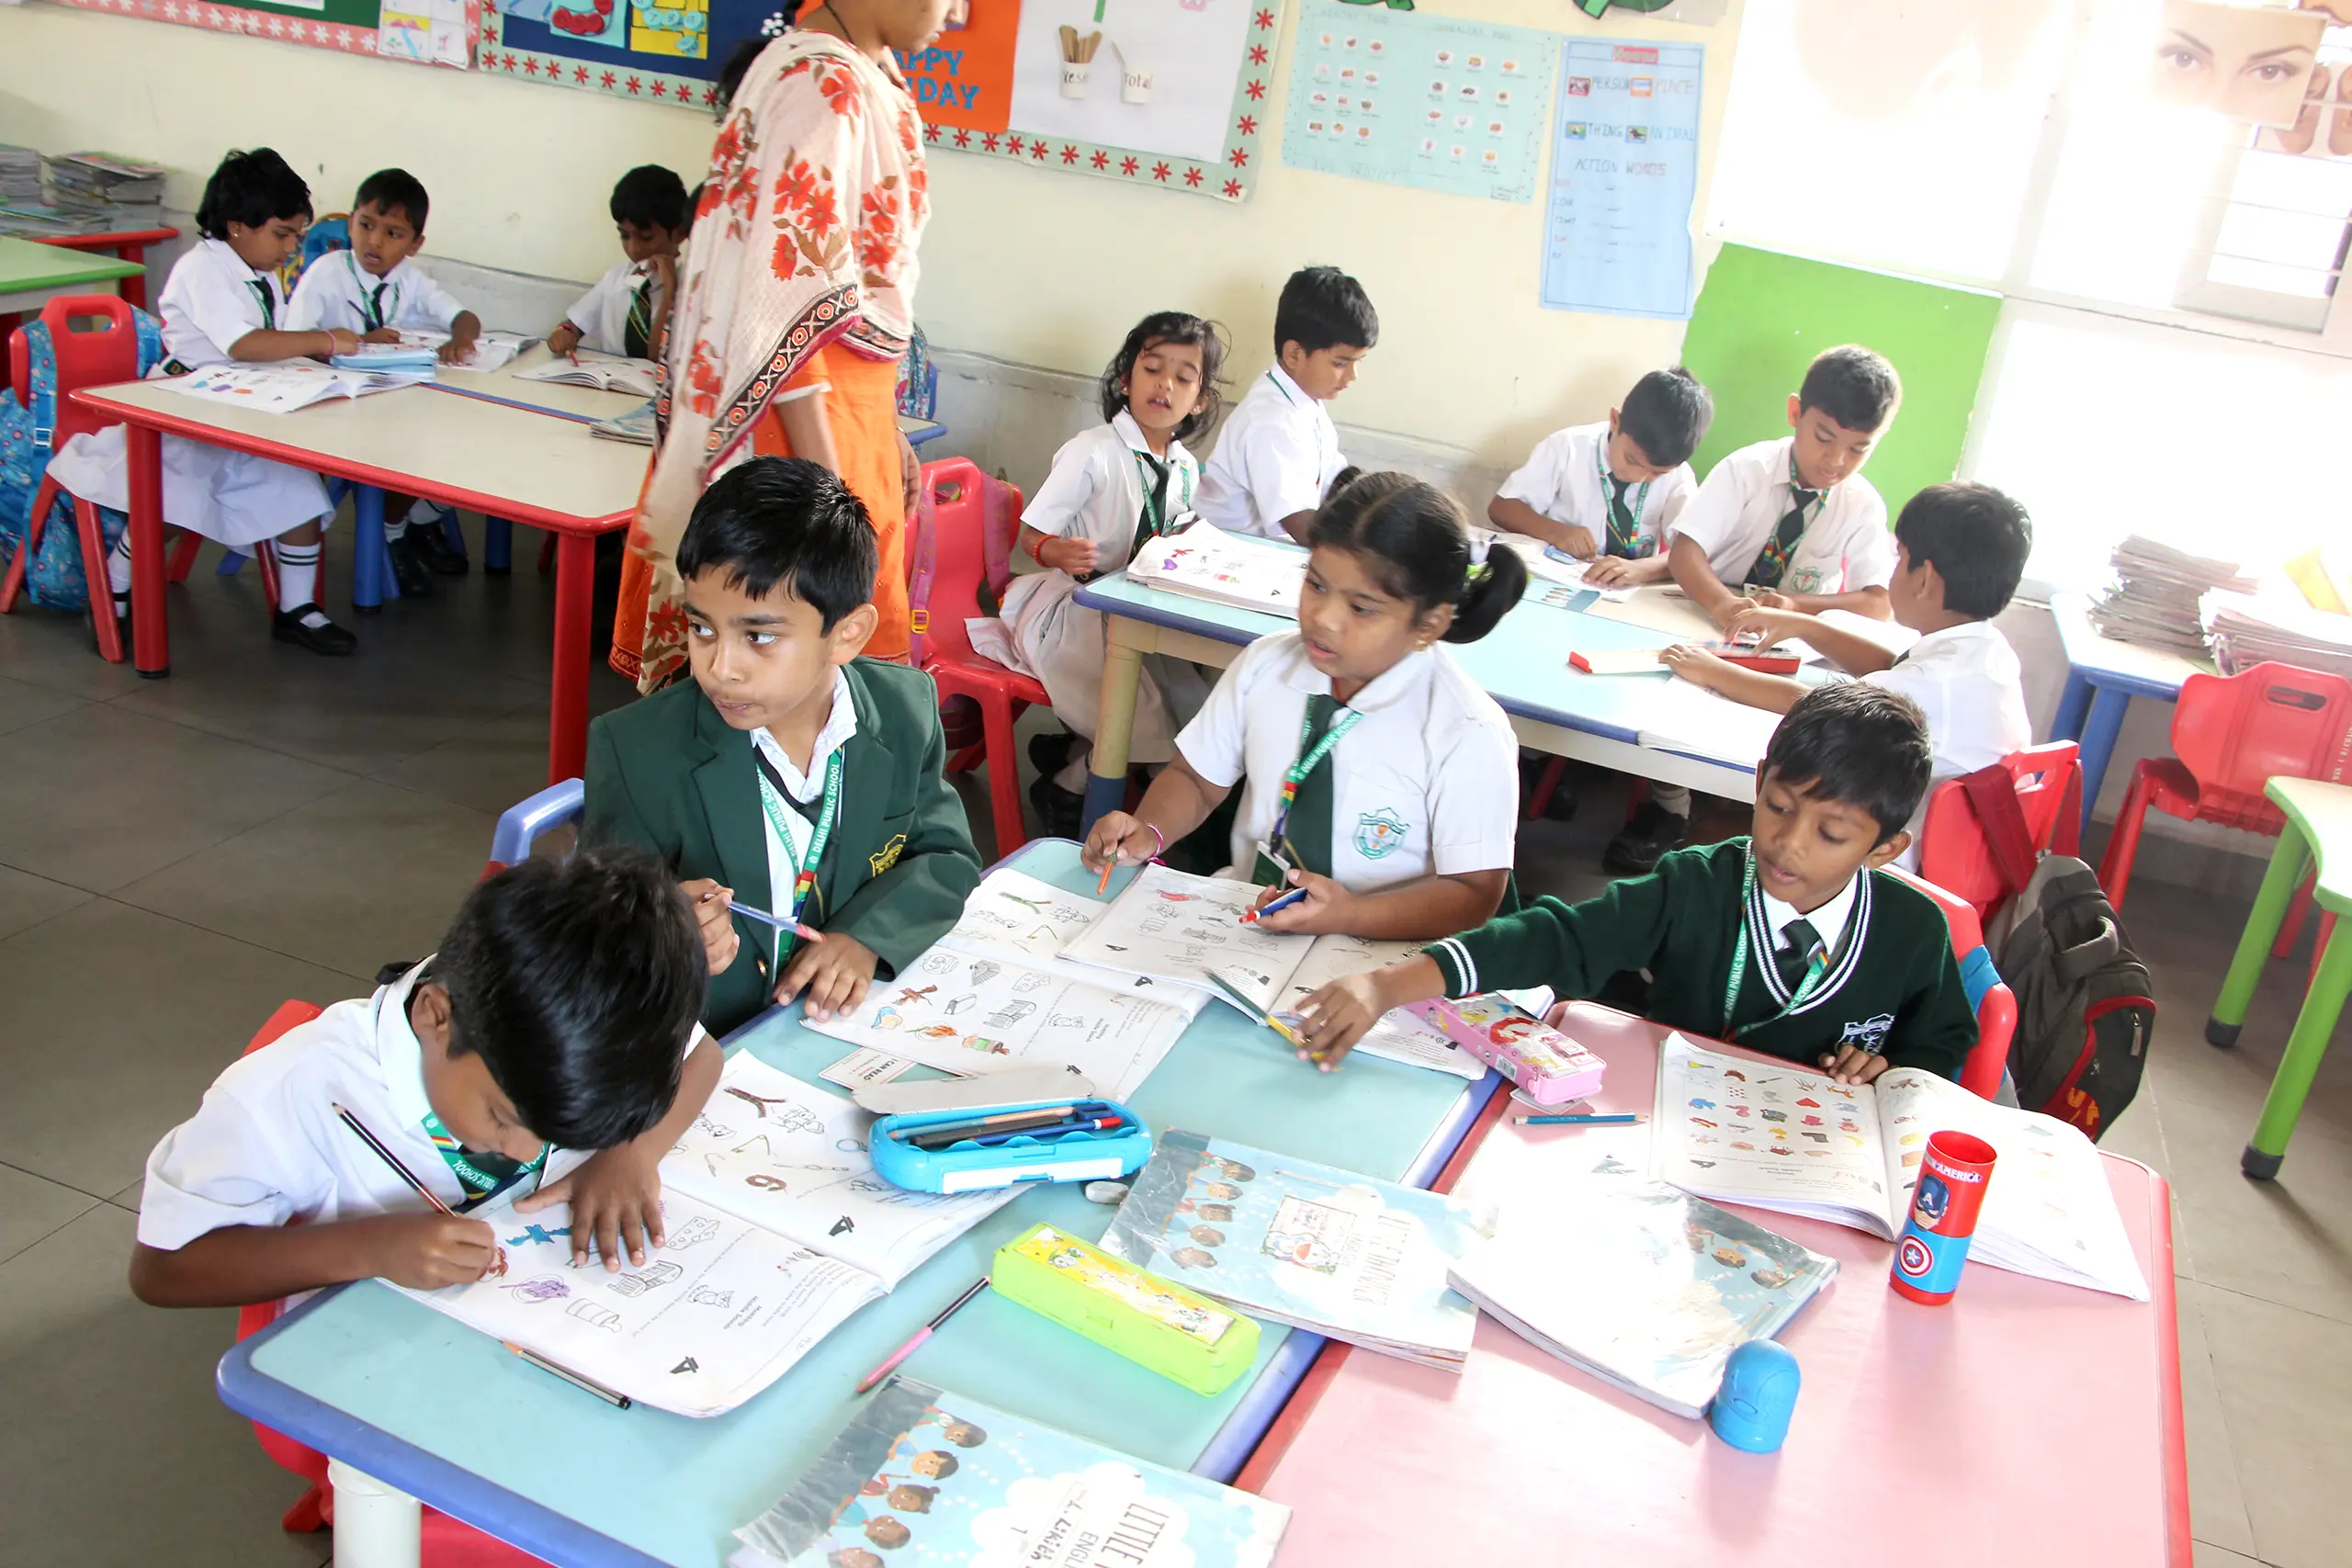 Students of DPS Warangal sitting in the class and completing their work under the guidance of teacher.